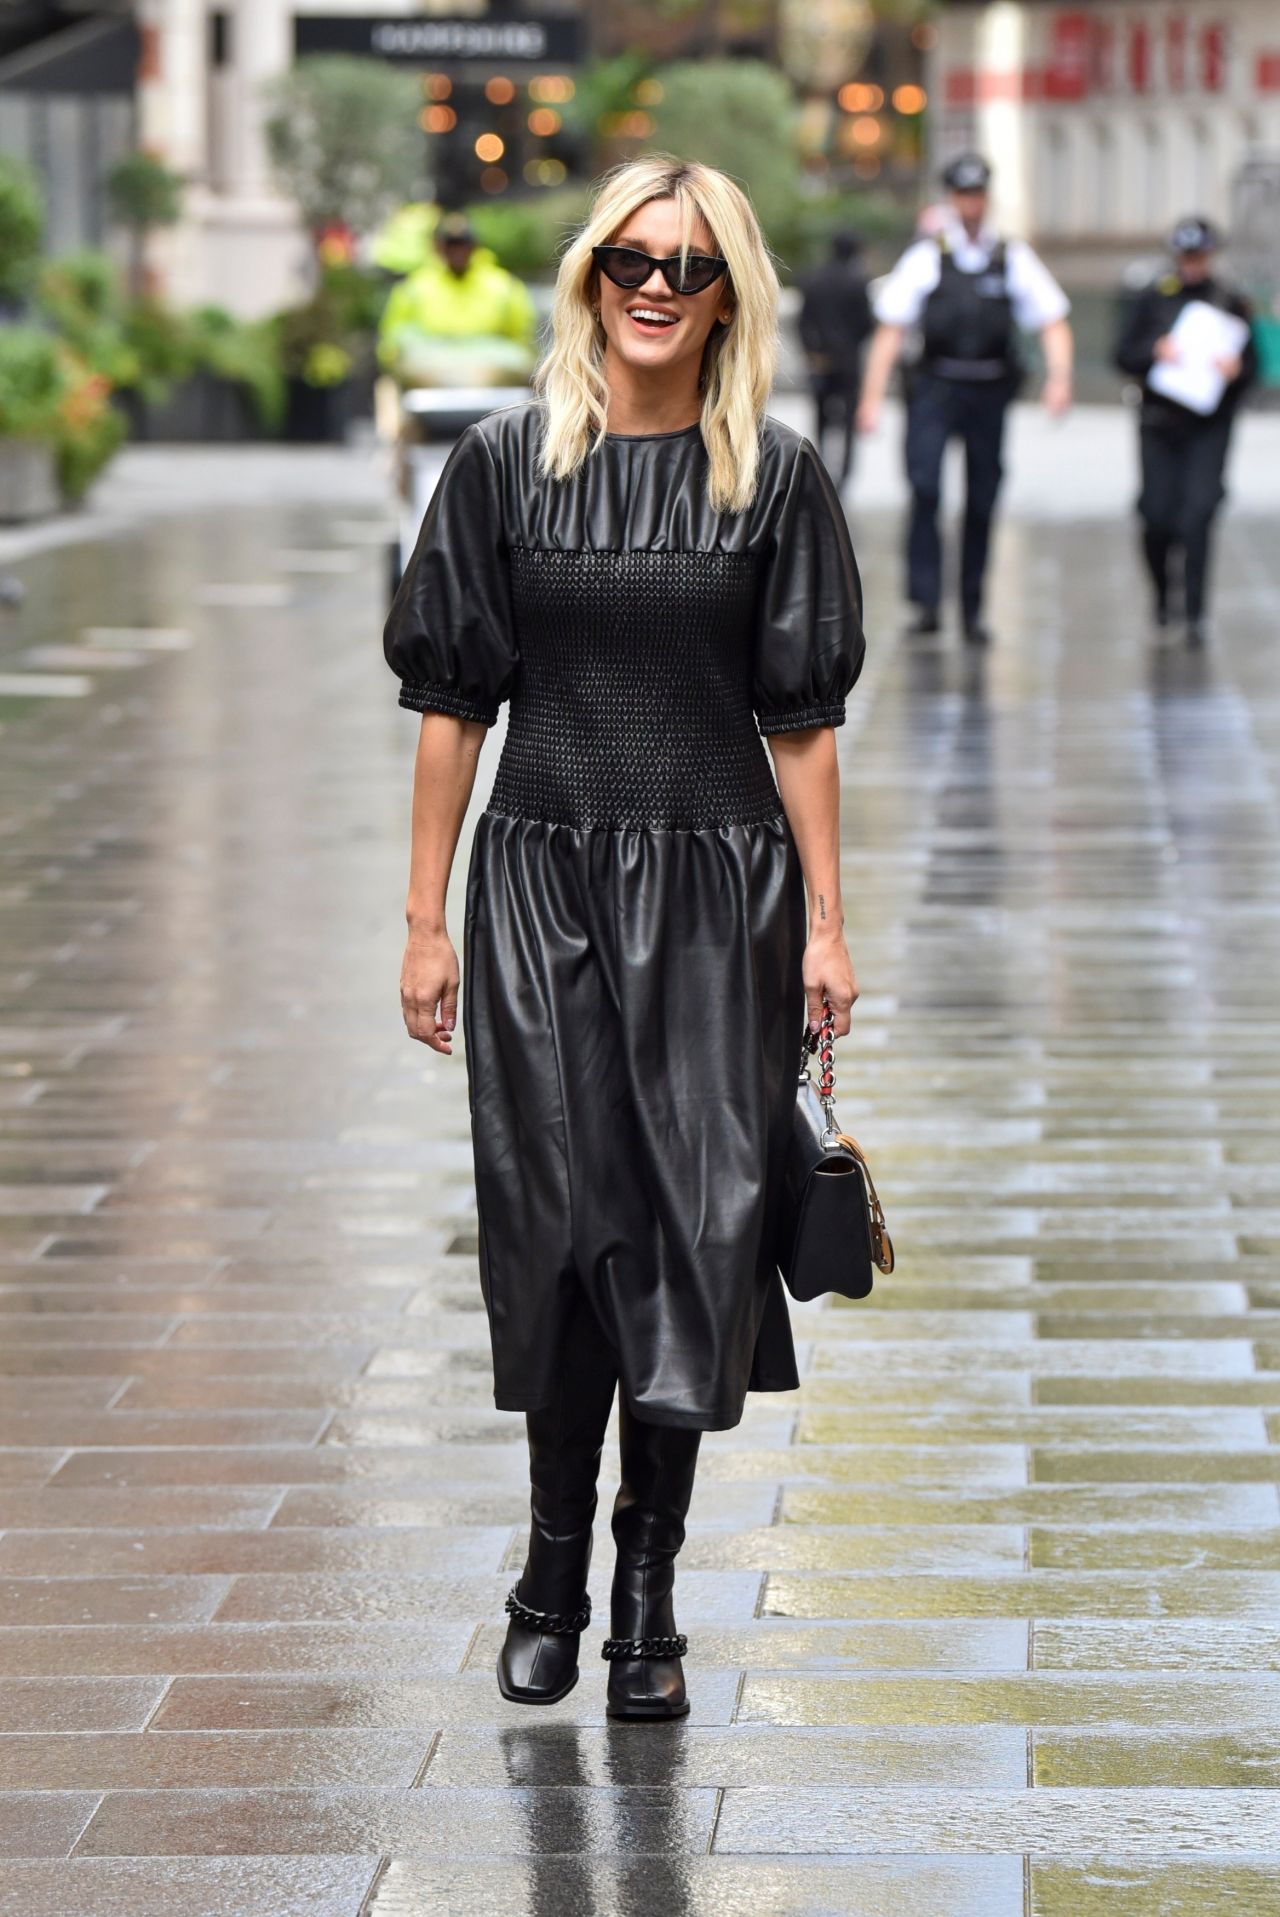 ashley-roberts-in-a-black-leather-dress-and-black-boots-at-the-heart-radio-studios-in-london-10-06-2020-3.jpg